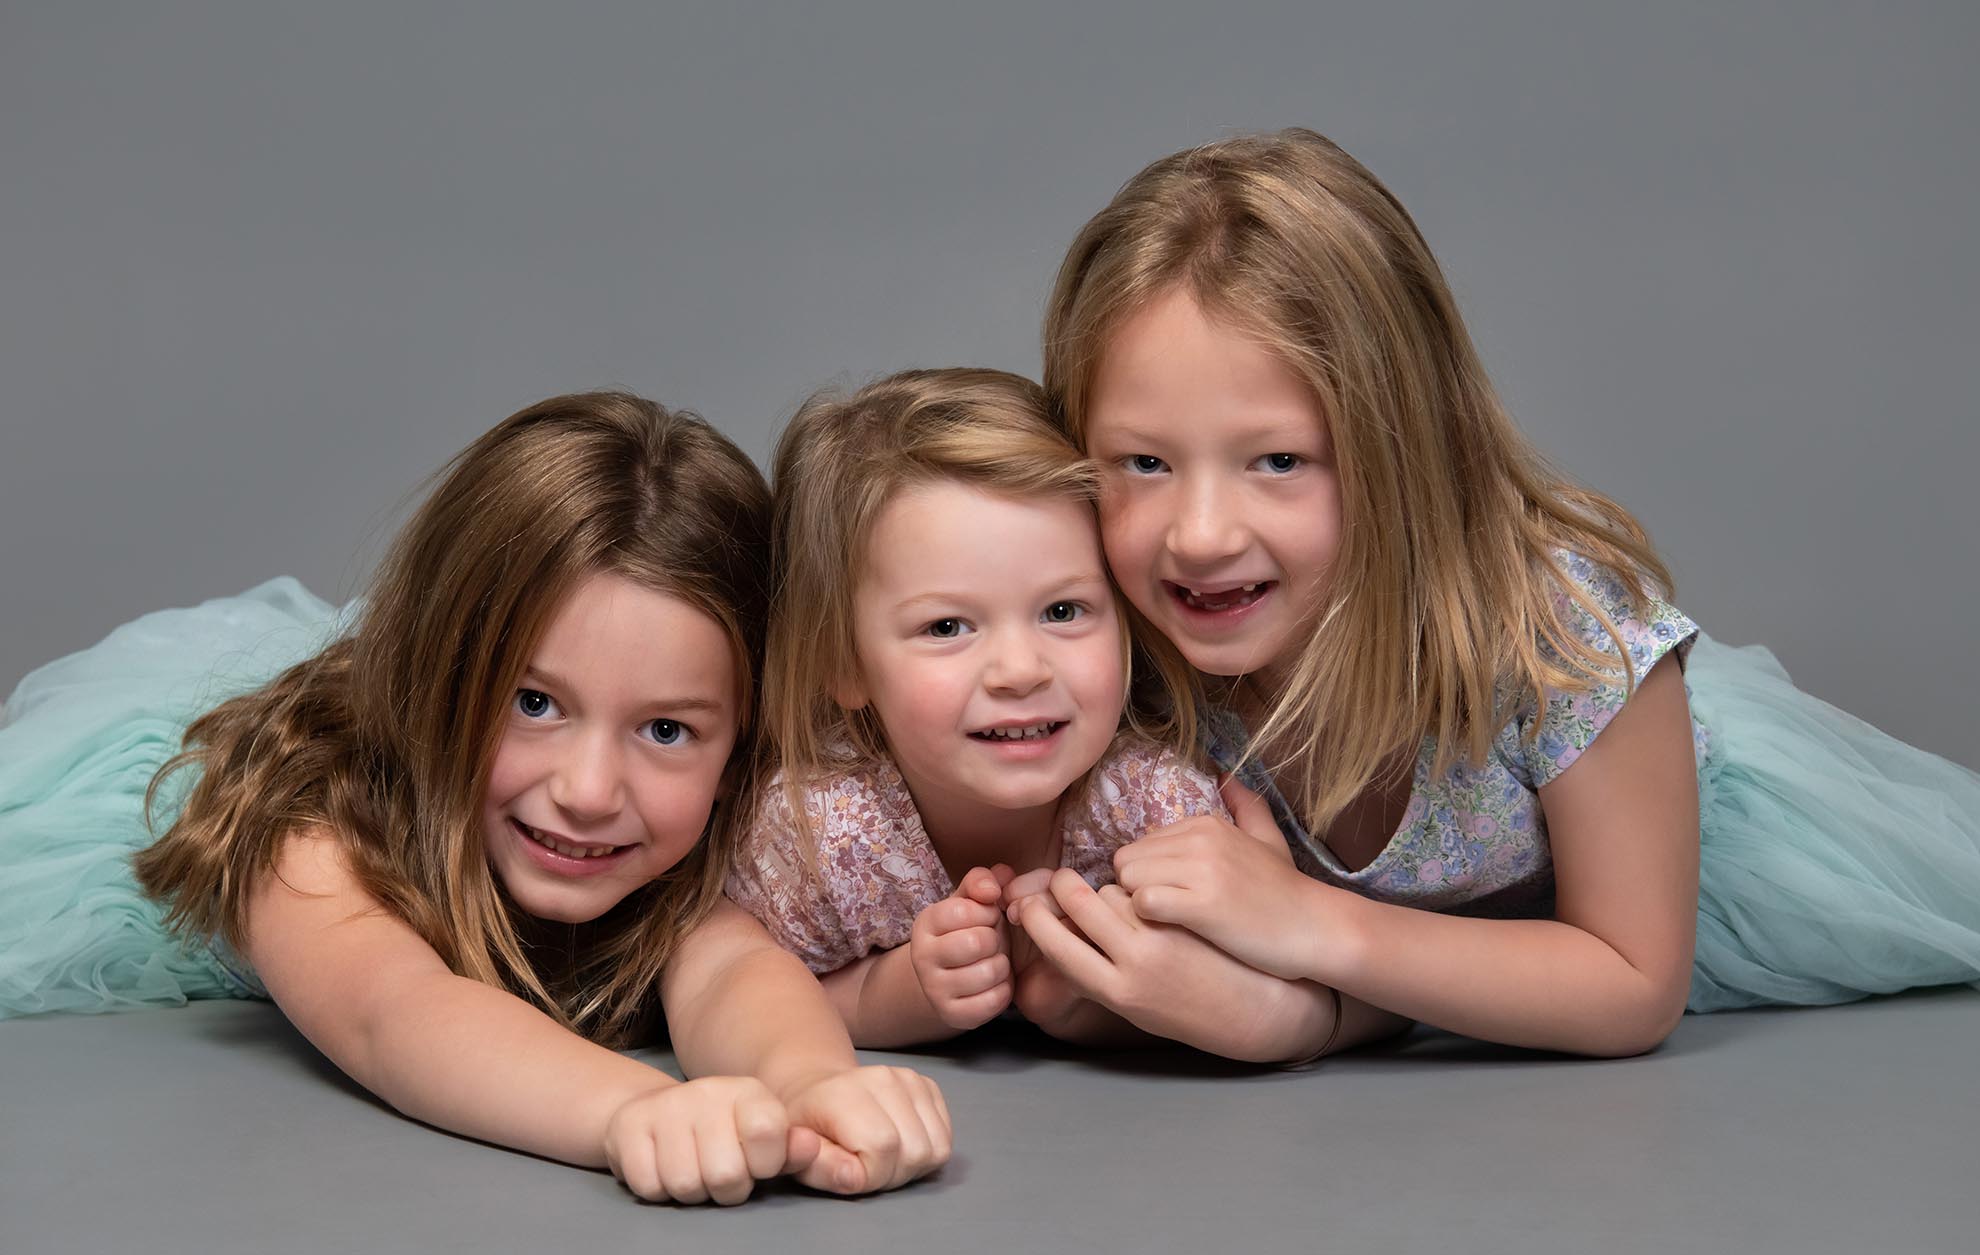 Three young sisters on floor of studio hugging and smiling